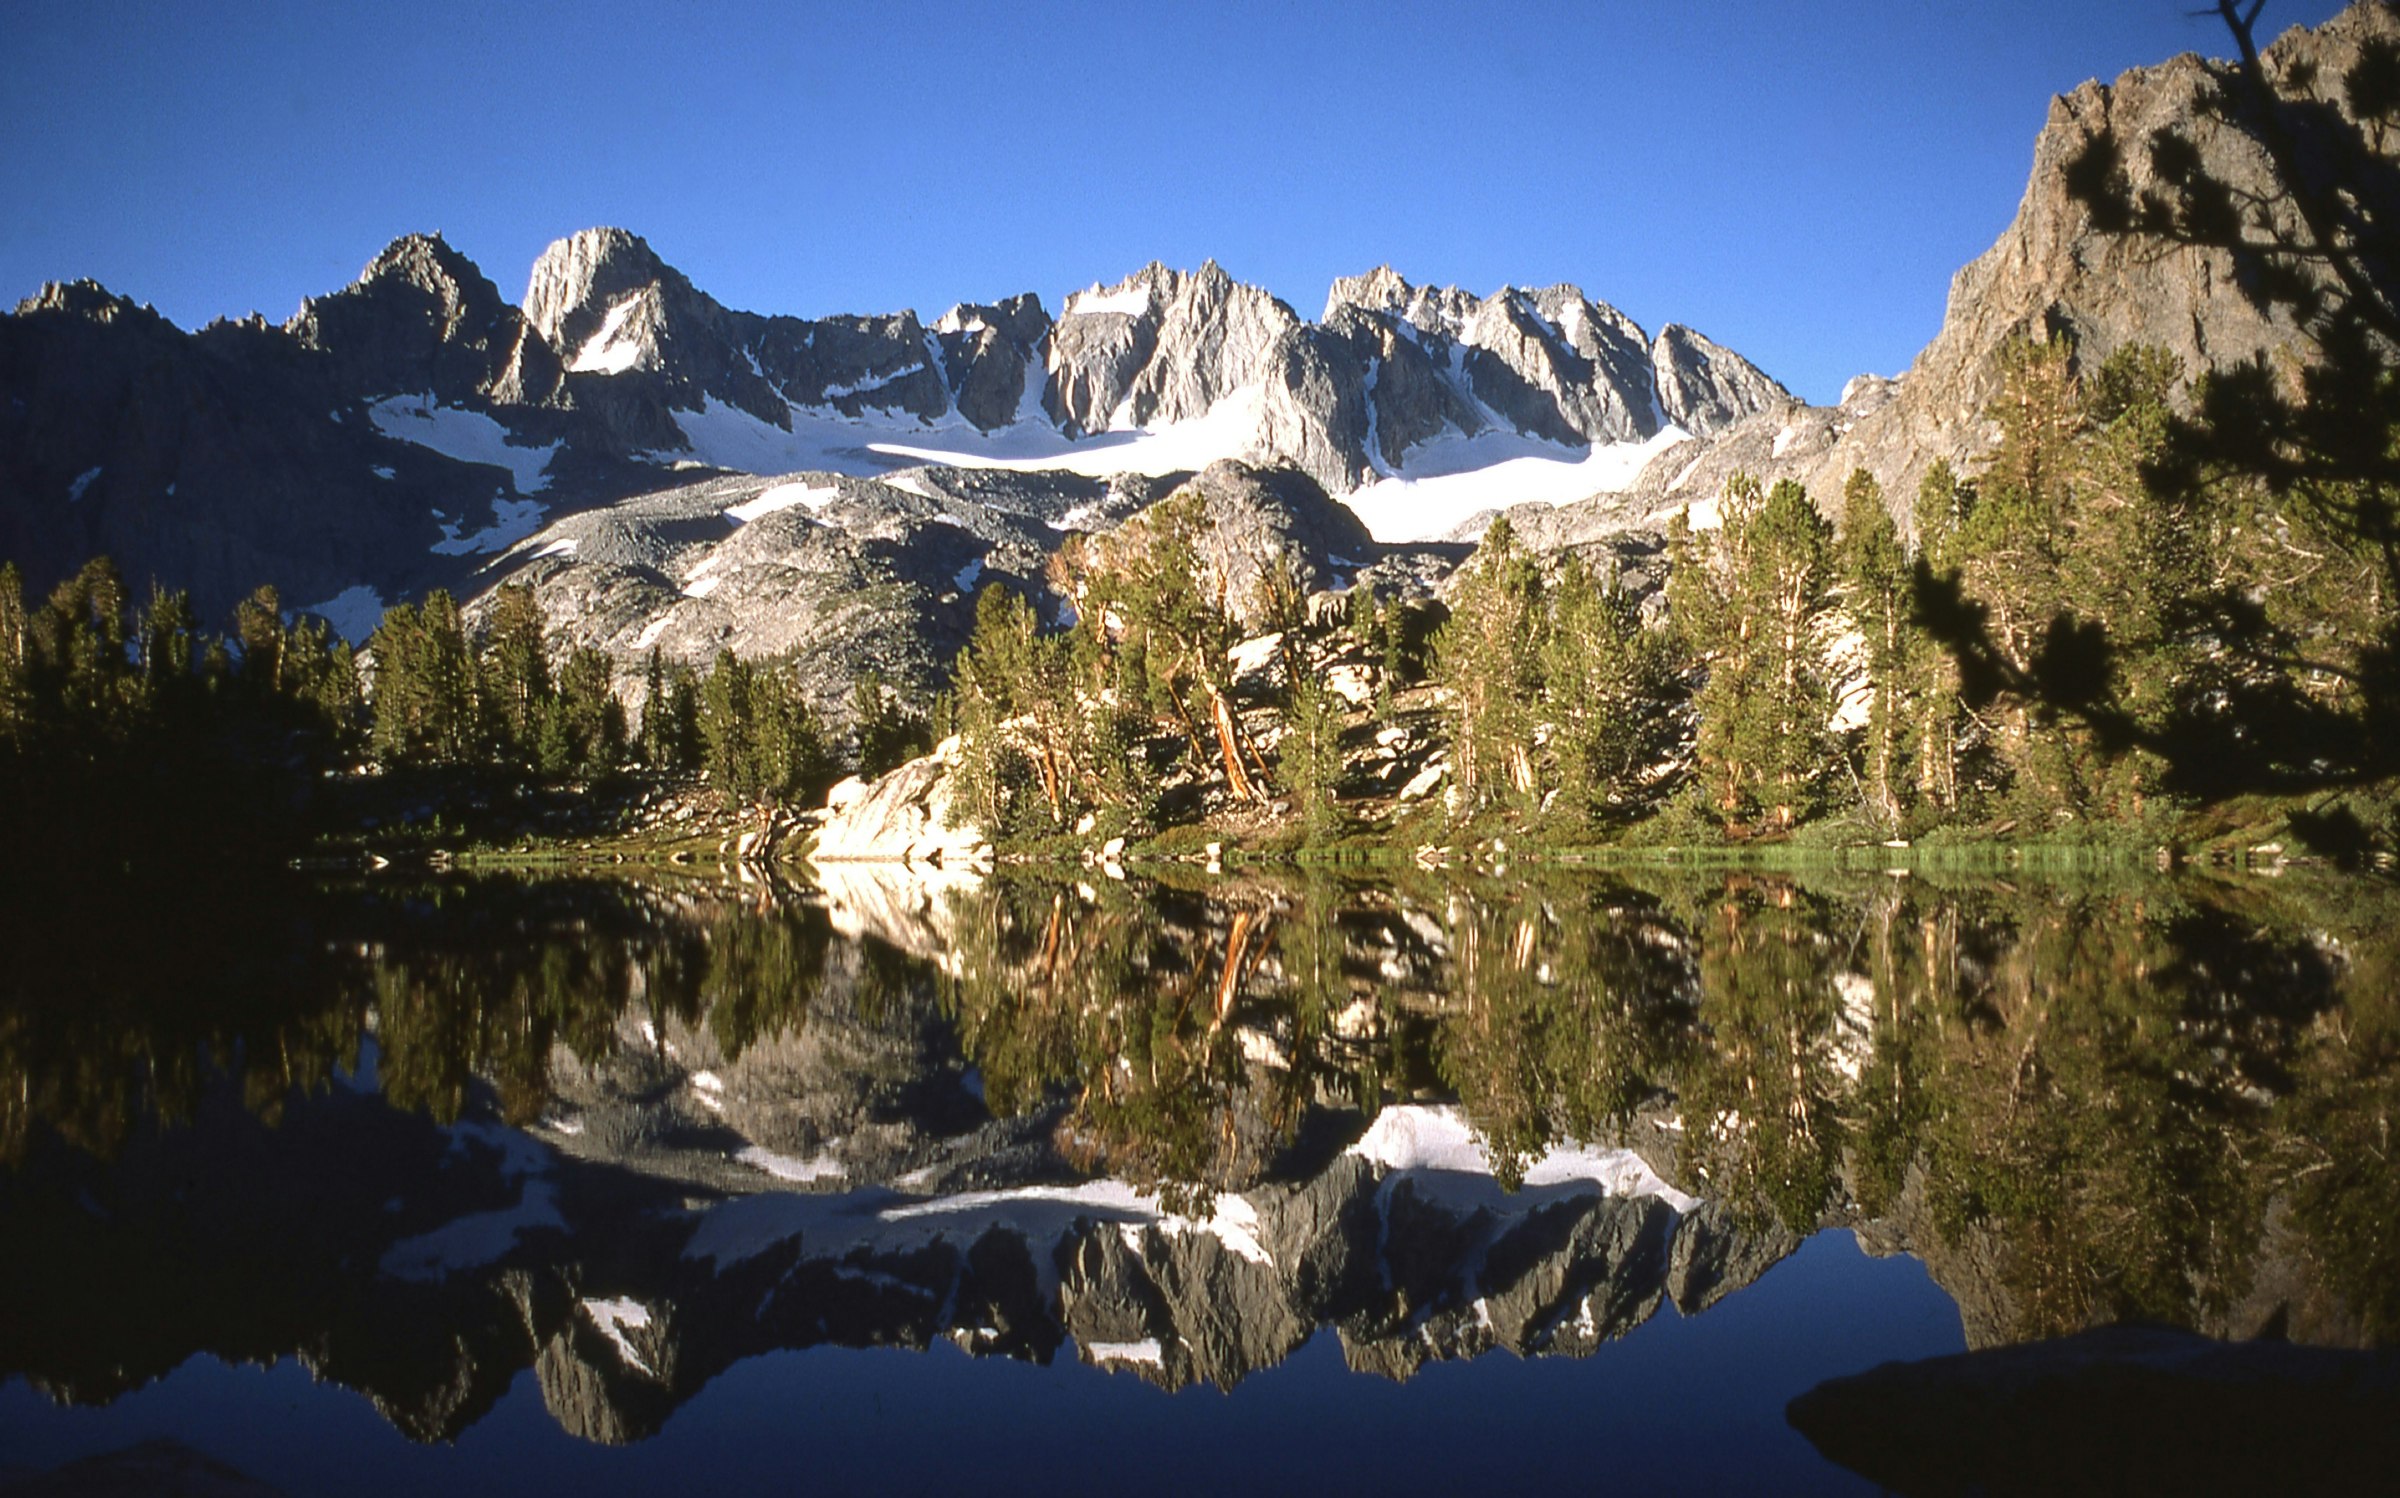 A glacial lake surrounded by snow capped mountains in King's Canyon, California